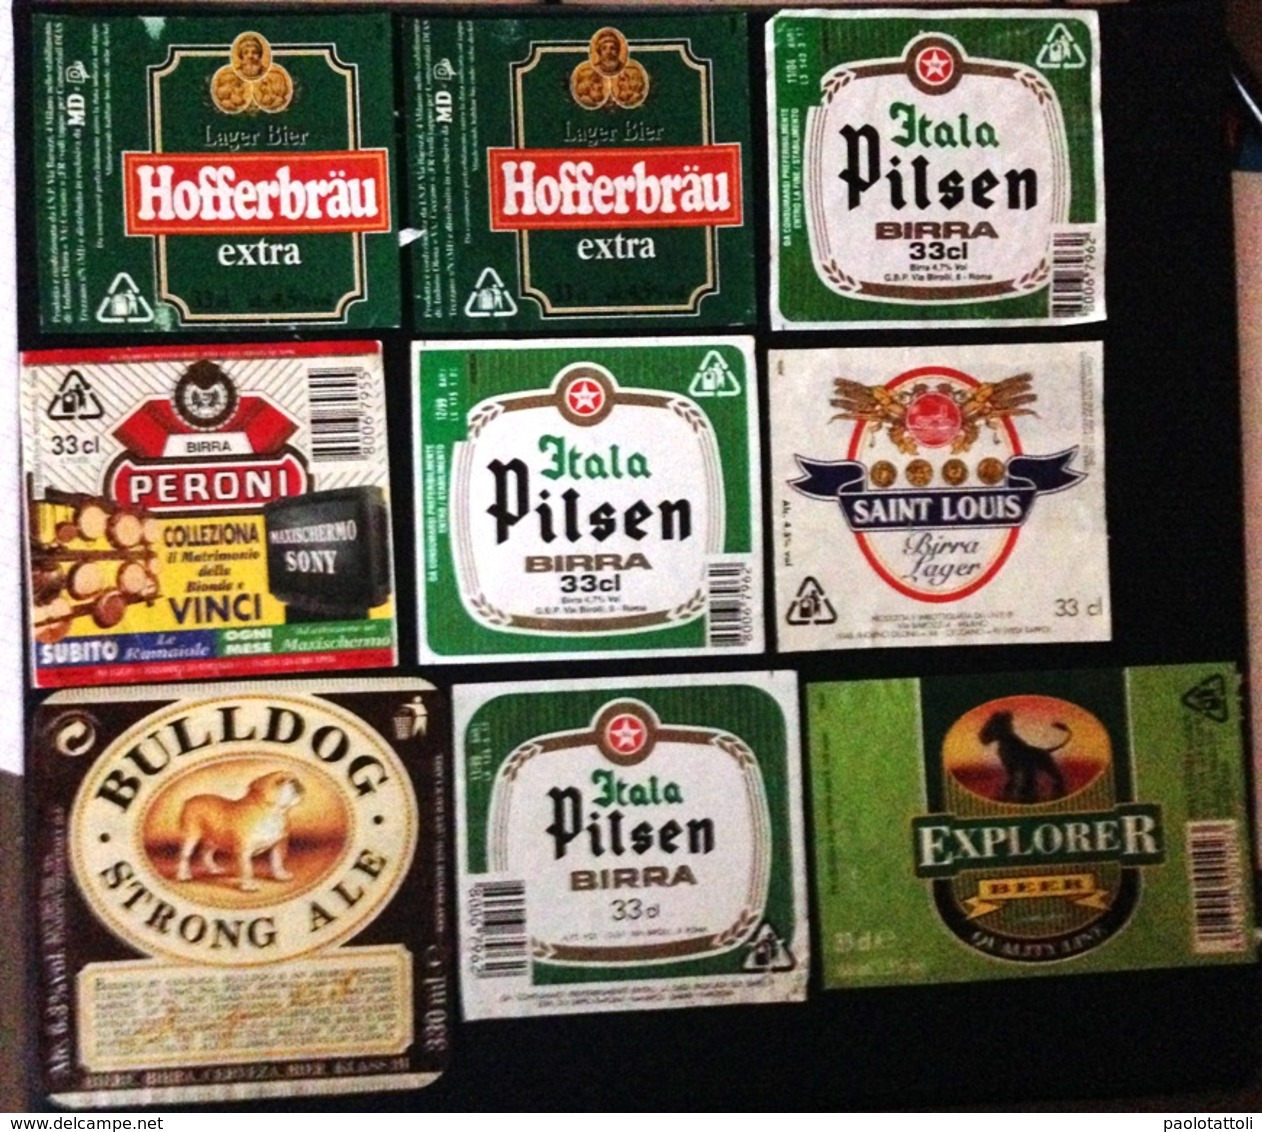 Used Beer label. Birra- Lot of 39 labels as per pictures.